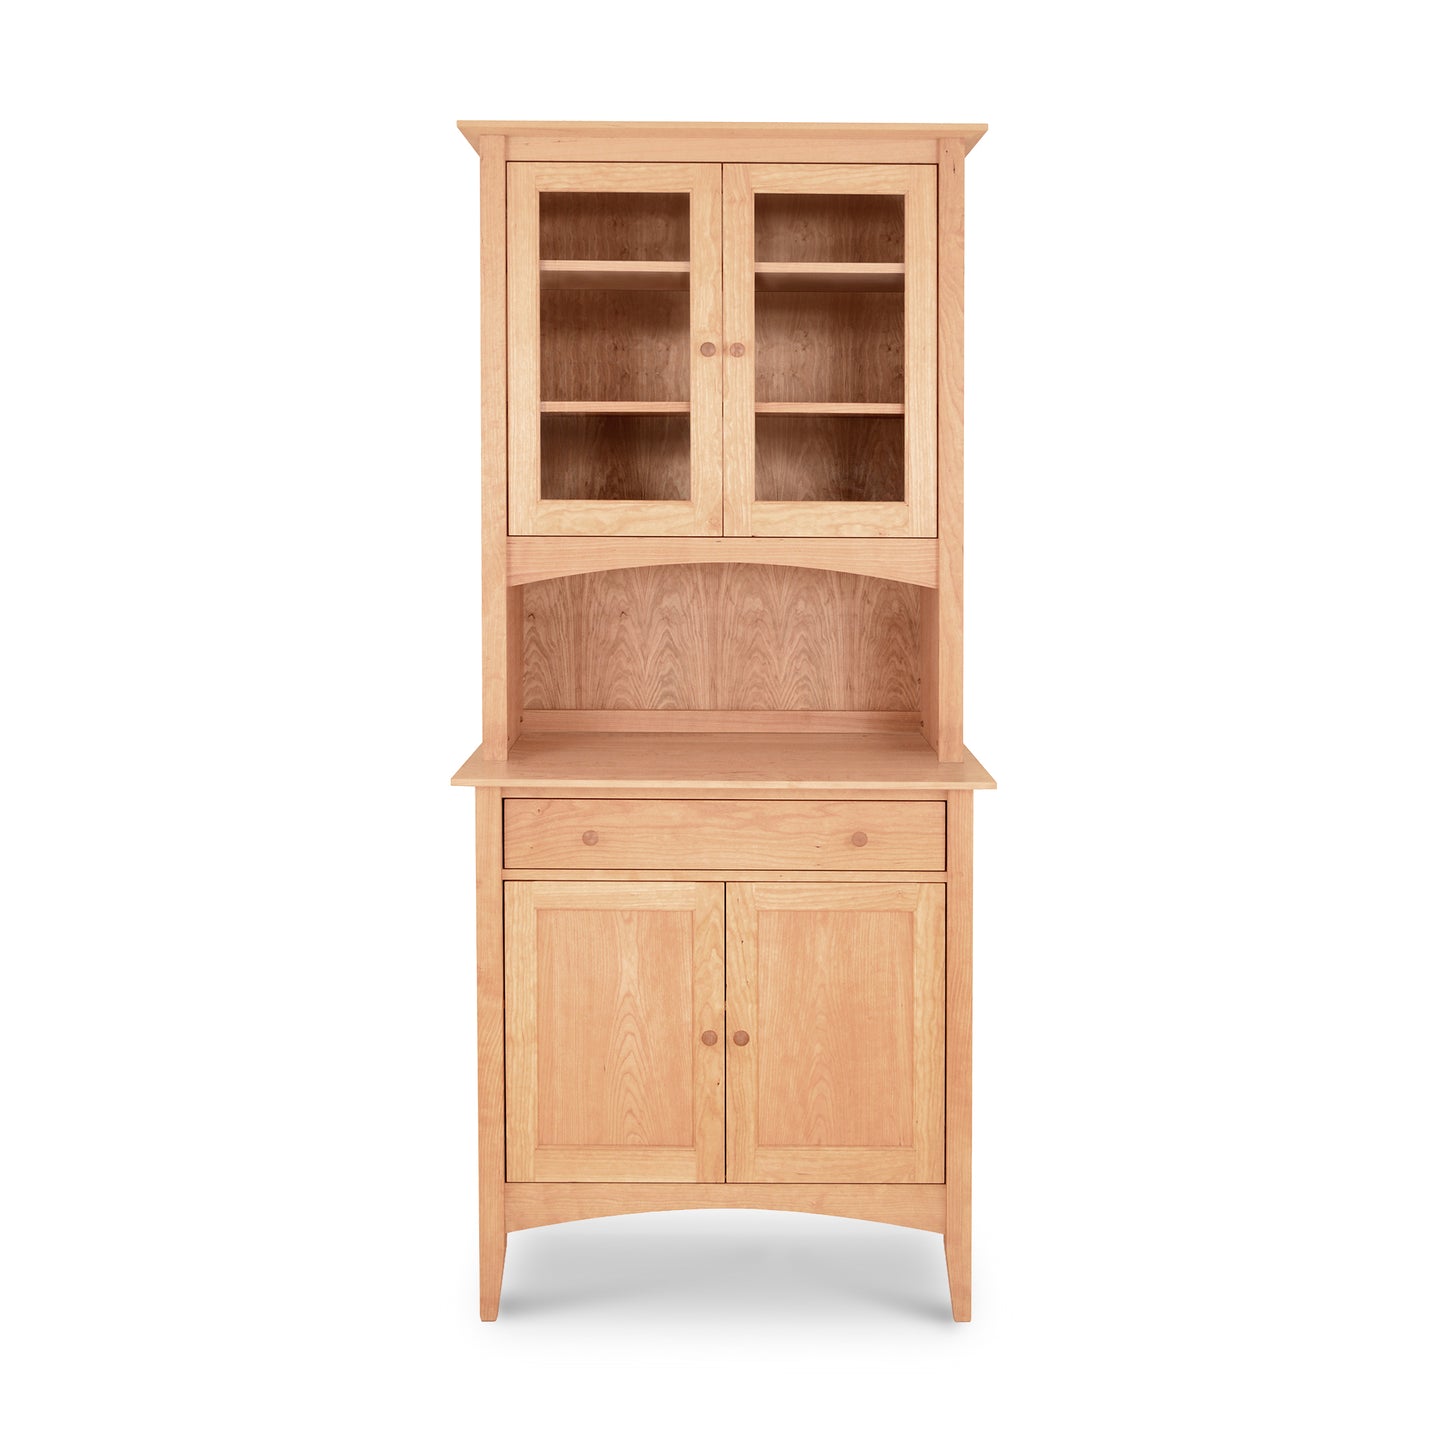 A Maple Corner Woodworks American Shaker Small 38" China Cabinet with a shelved upper cabinet with glass doors and a lower cabinet with solid doors, showcasing Vermont Craftsmanship, isolated on a white background.